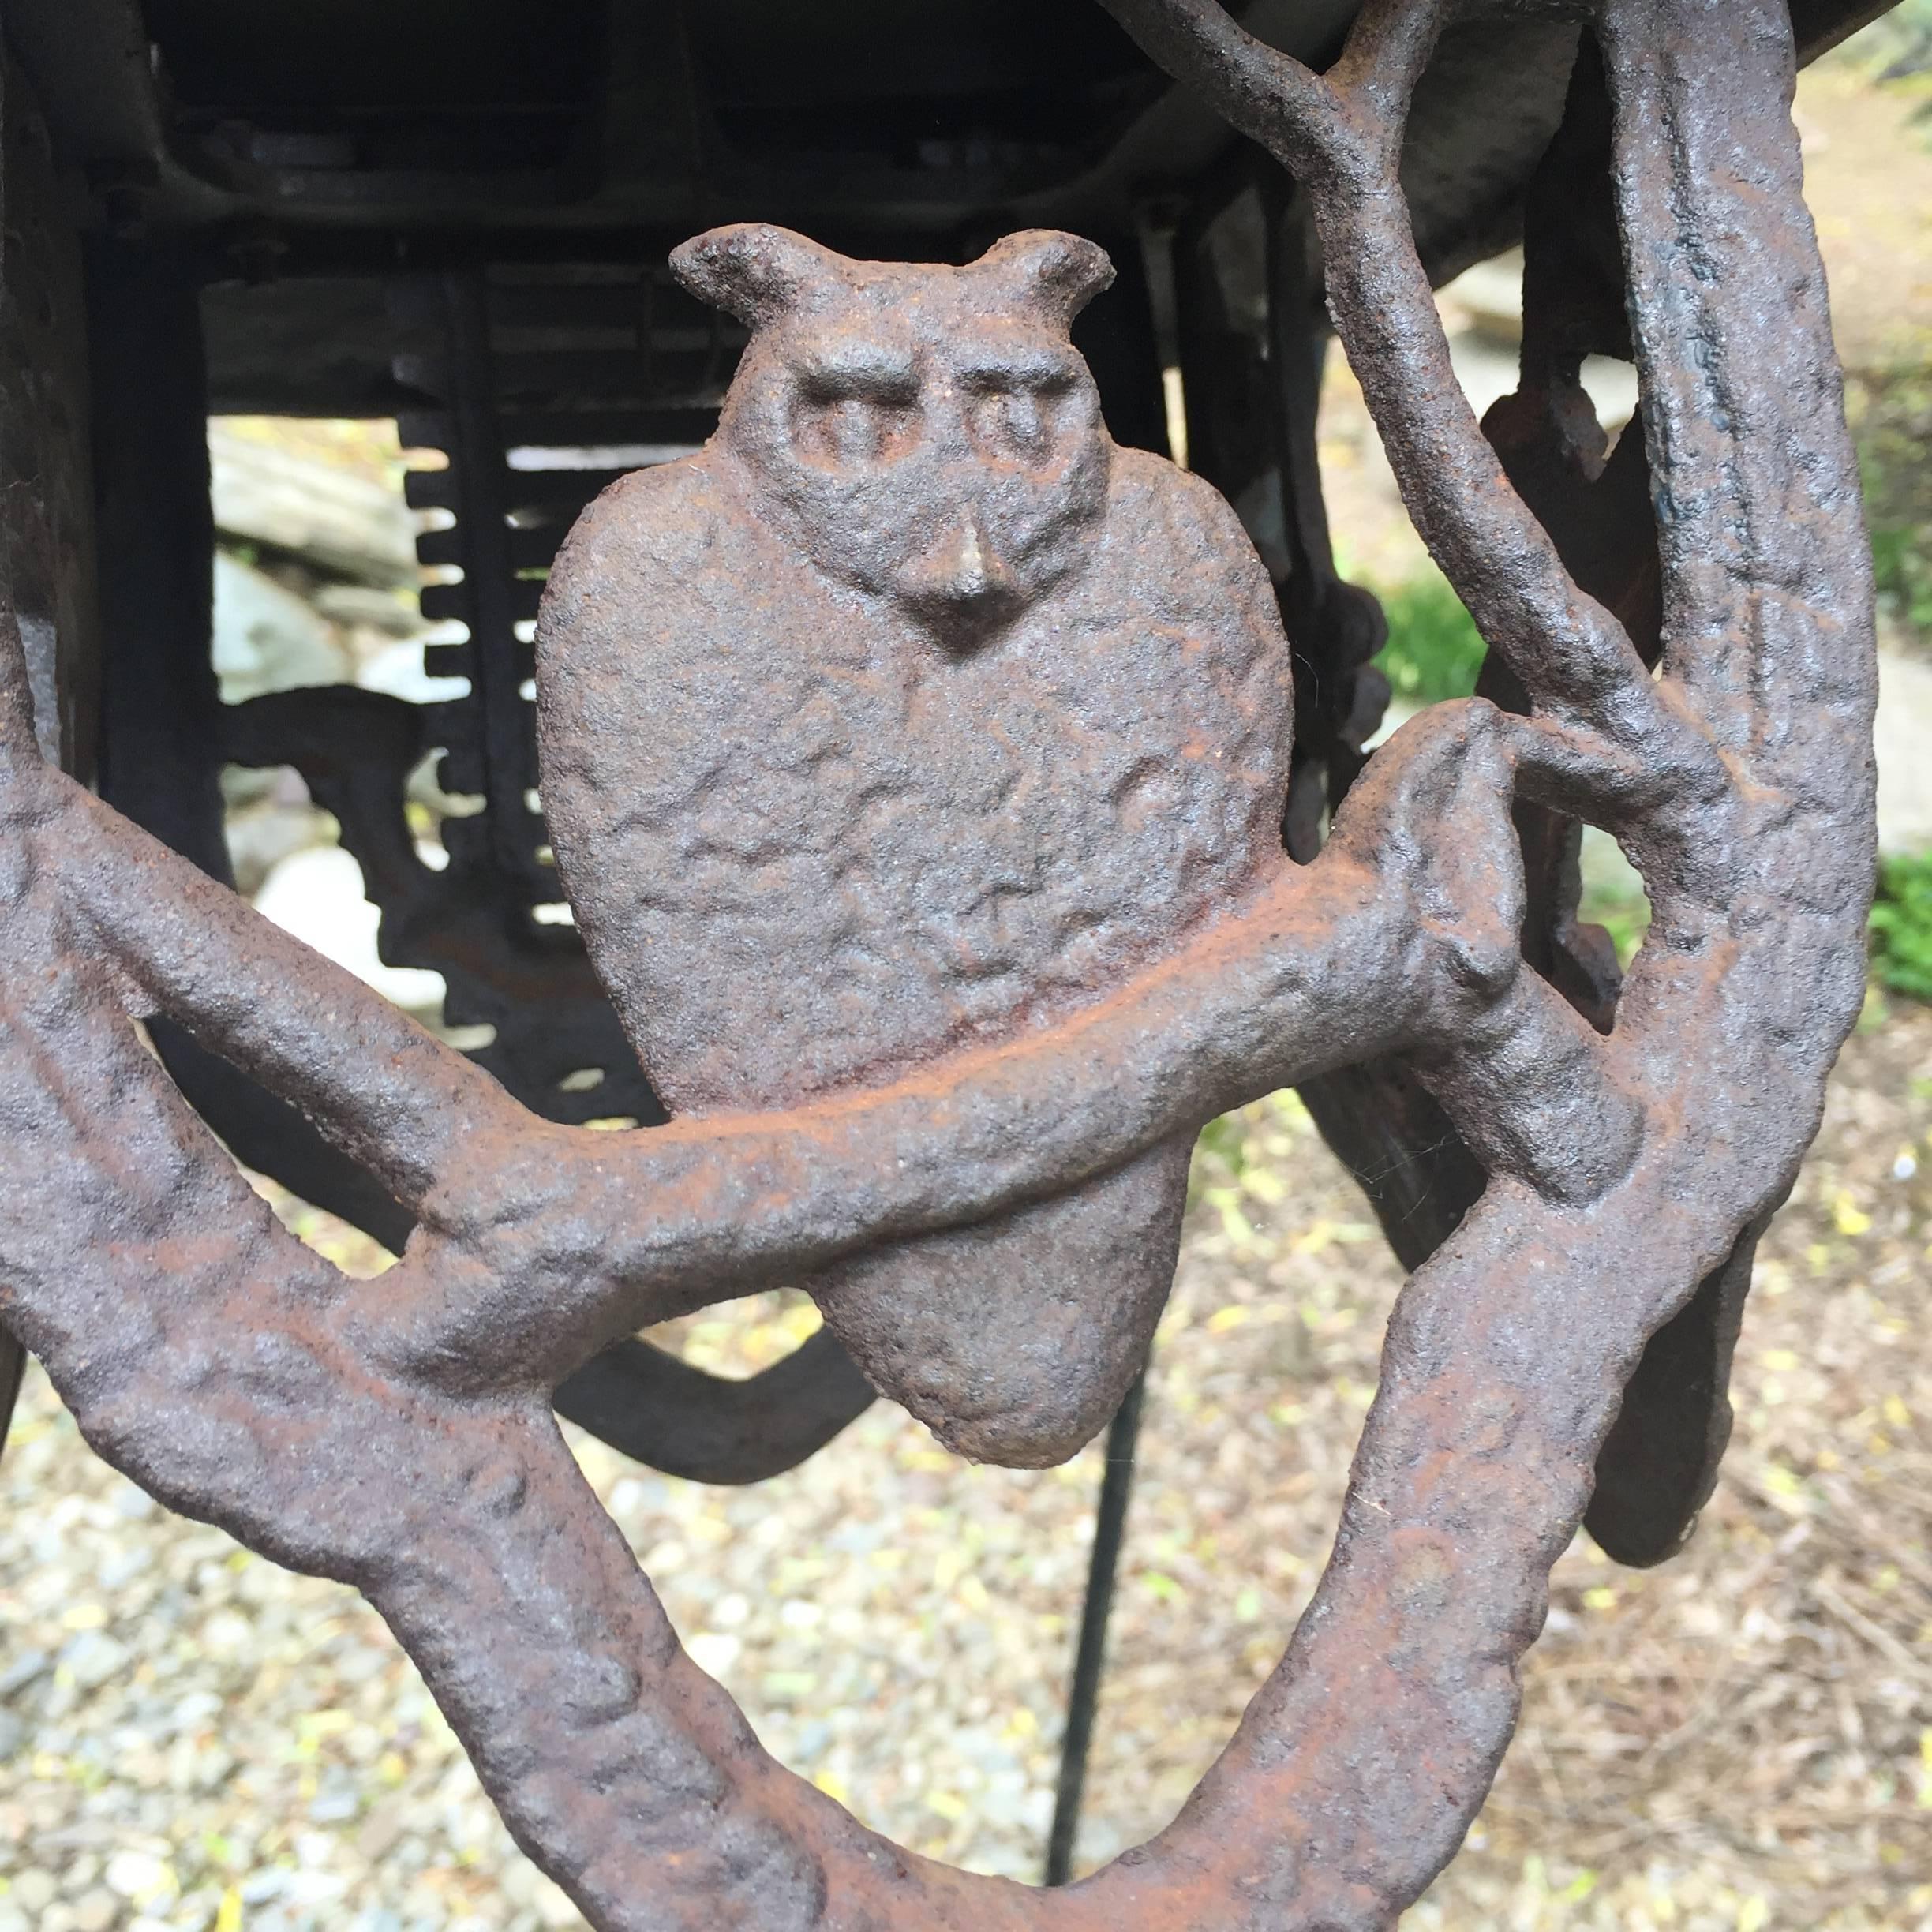 Here's an unusual recent acquisition coming from our recent travels to Japan. It could be a beautiful and unique way to accent your indoor or outdoor garden space.

This is a hand cast iron hanging lantern with a rare motif of an owl displayed on